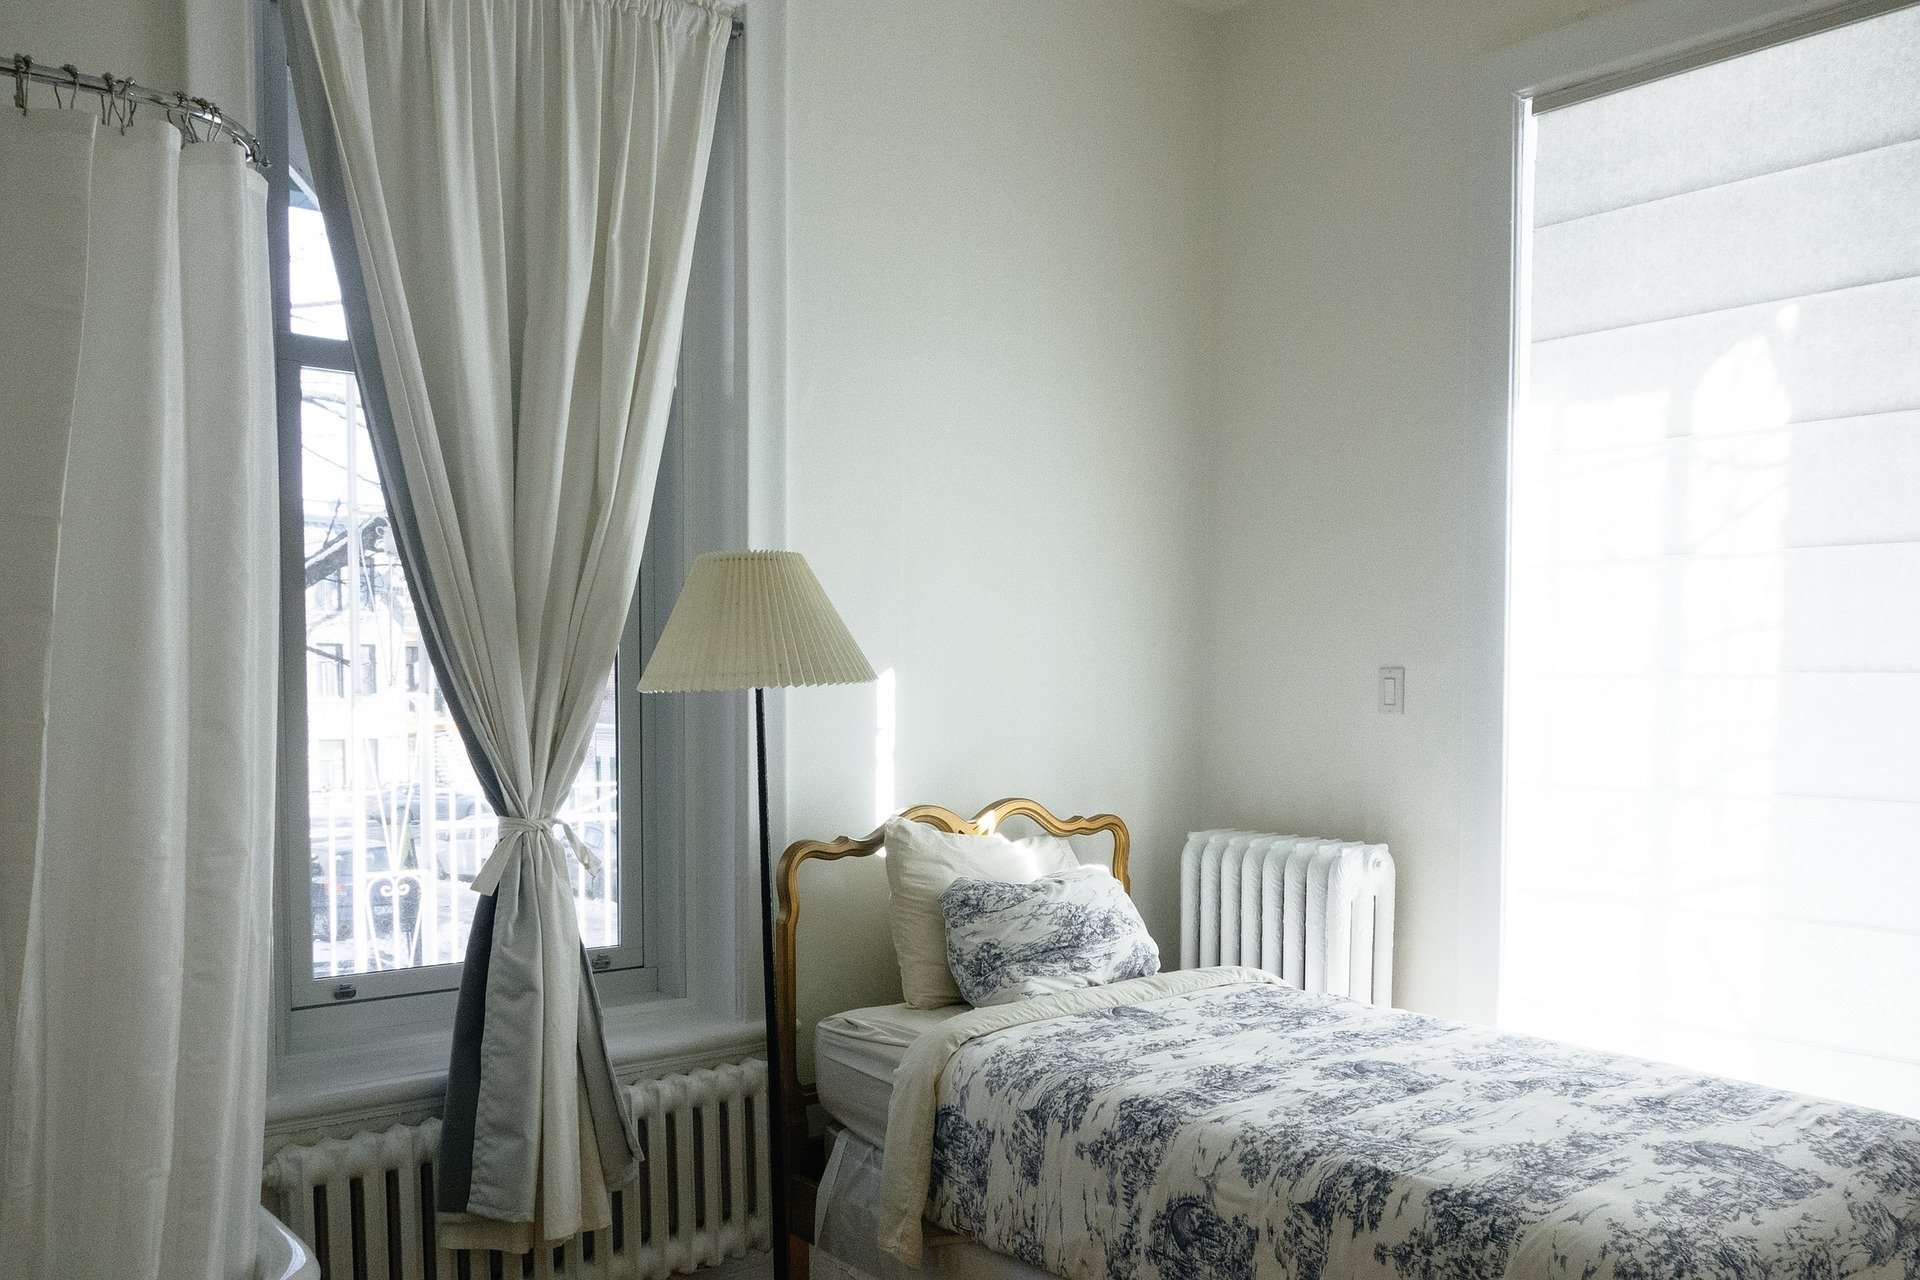 Spritz Your Curtains with a Little Water